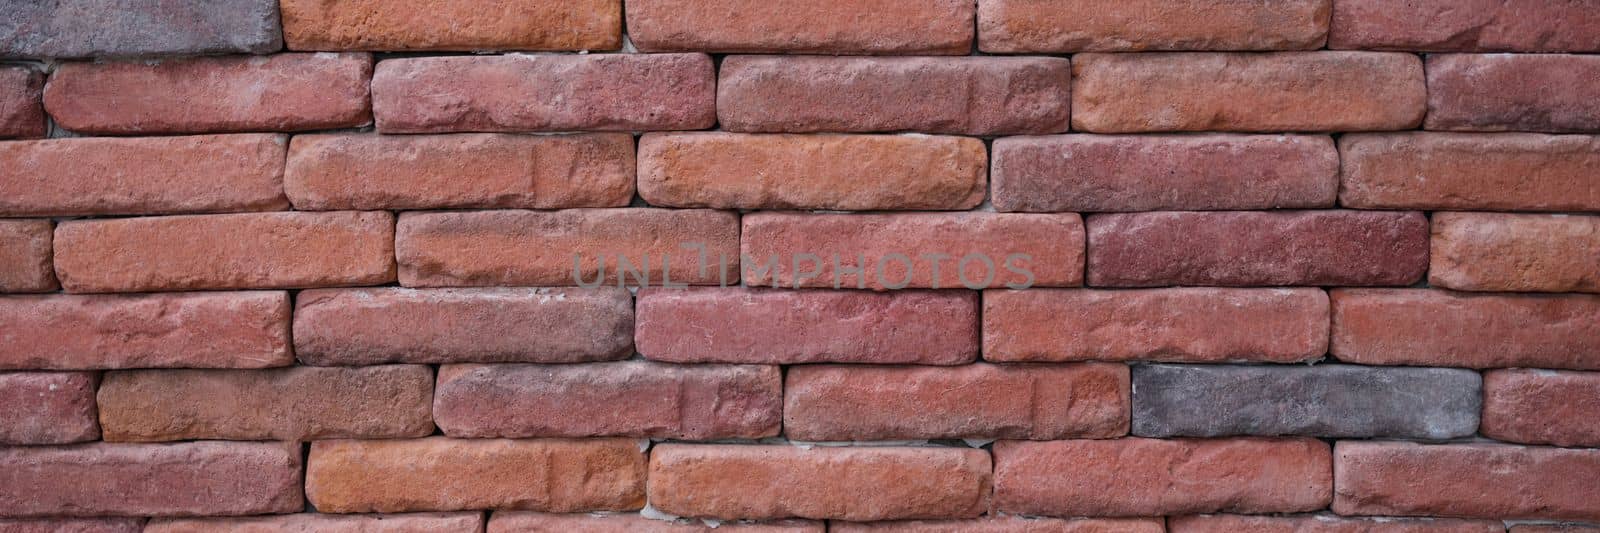 Texture of old red brick wall. Background of empty brick wall basement concept